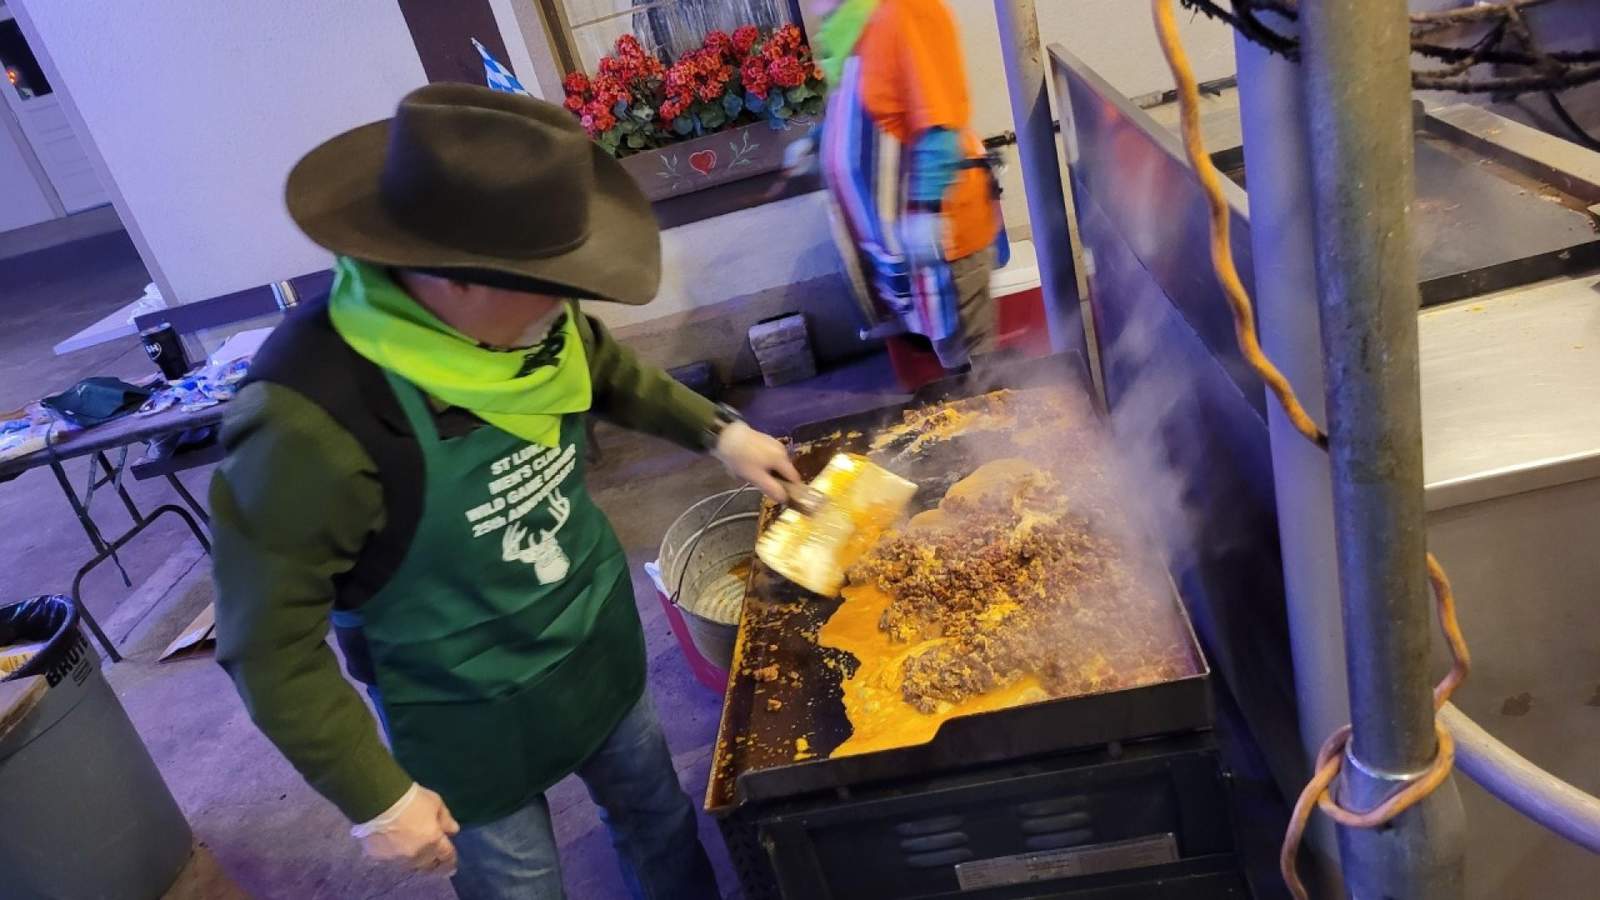 Cowboy Breakfast sees big changes due to pandemic, delivers tacos to San Antonio non-profits